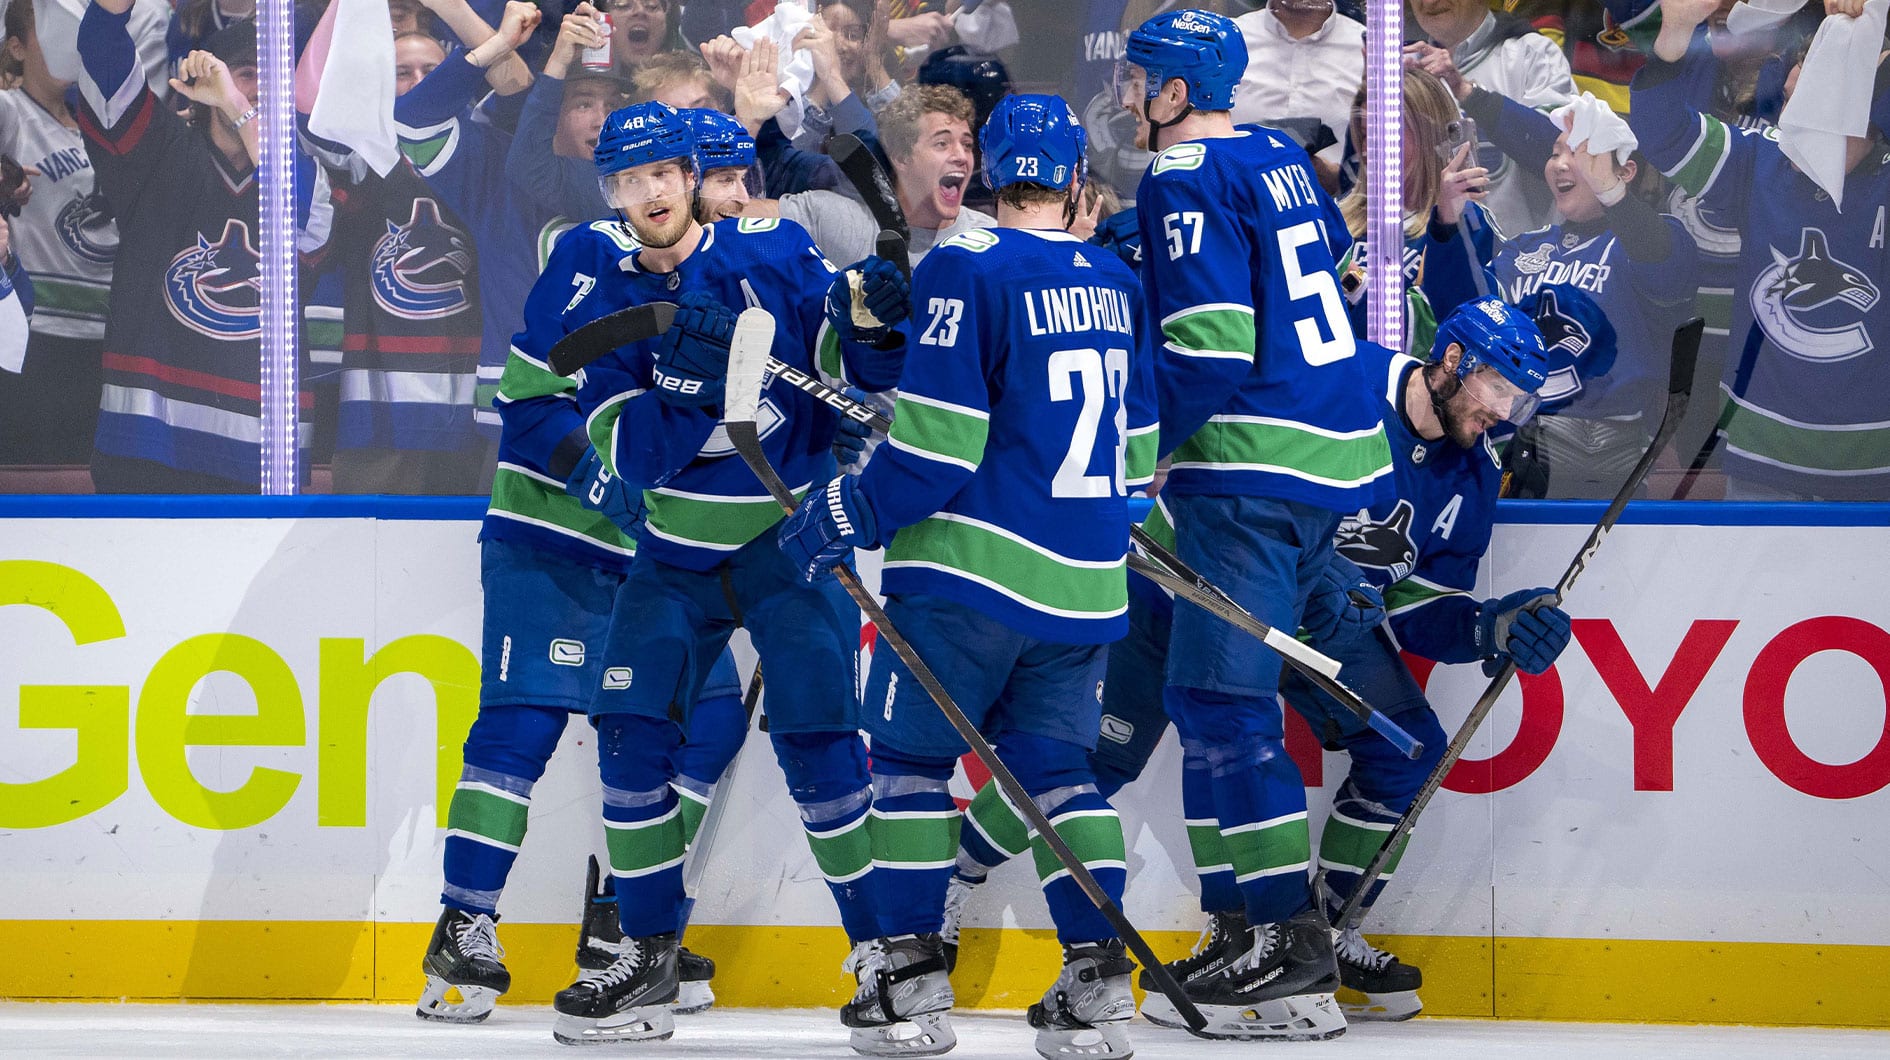 Vancouver Canucks forward Elias Pettersson (40) and defenseman Tyler Myers (57) and forward J.T. Miller (9) and defenseman Carson Soucy (7) celebrate after the game winning goal against the Edmonton Oilers during the third period in game five of the second round of the 2024 Stanley Cup Playoffs at Rogers Arena.